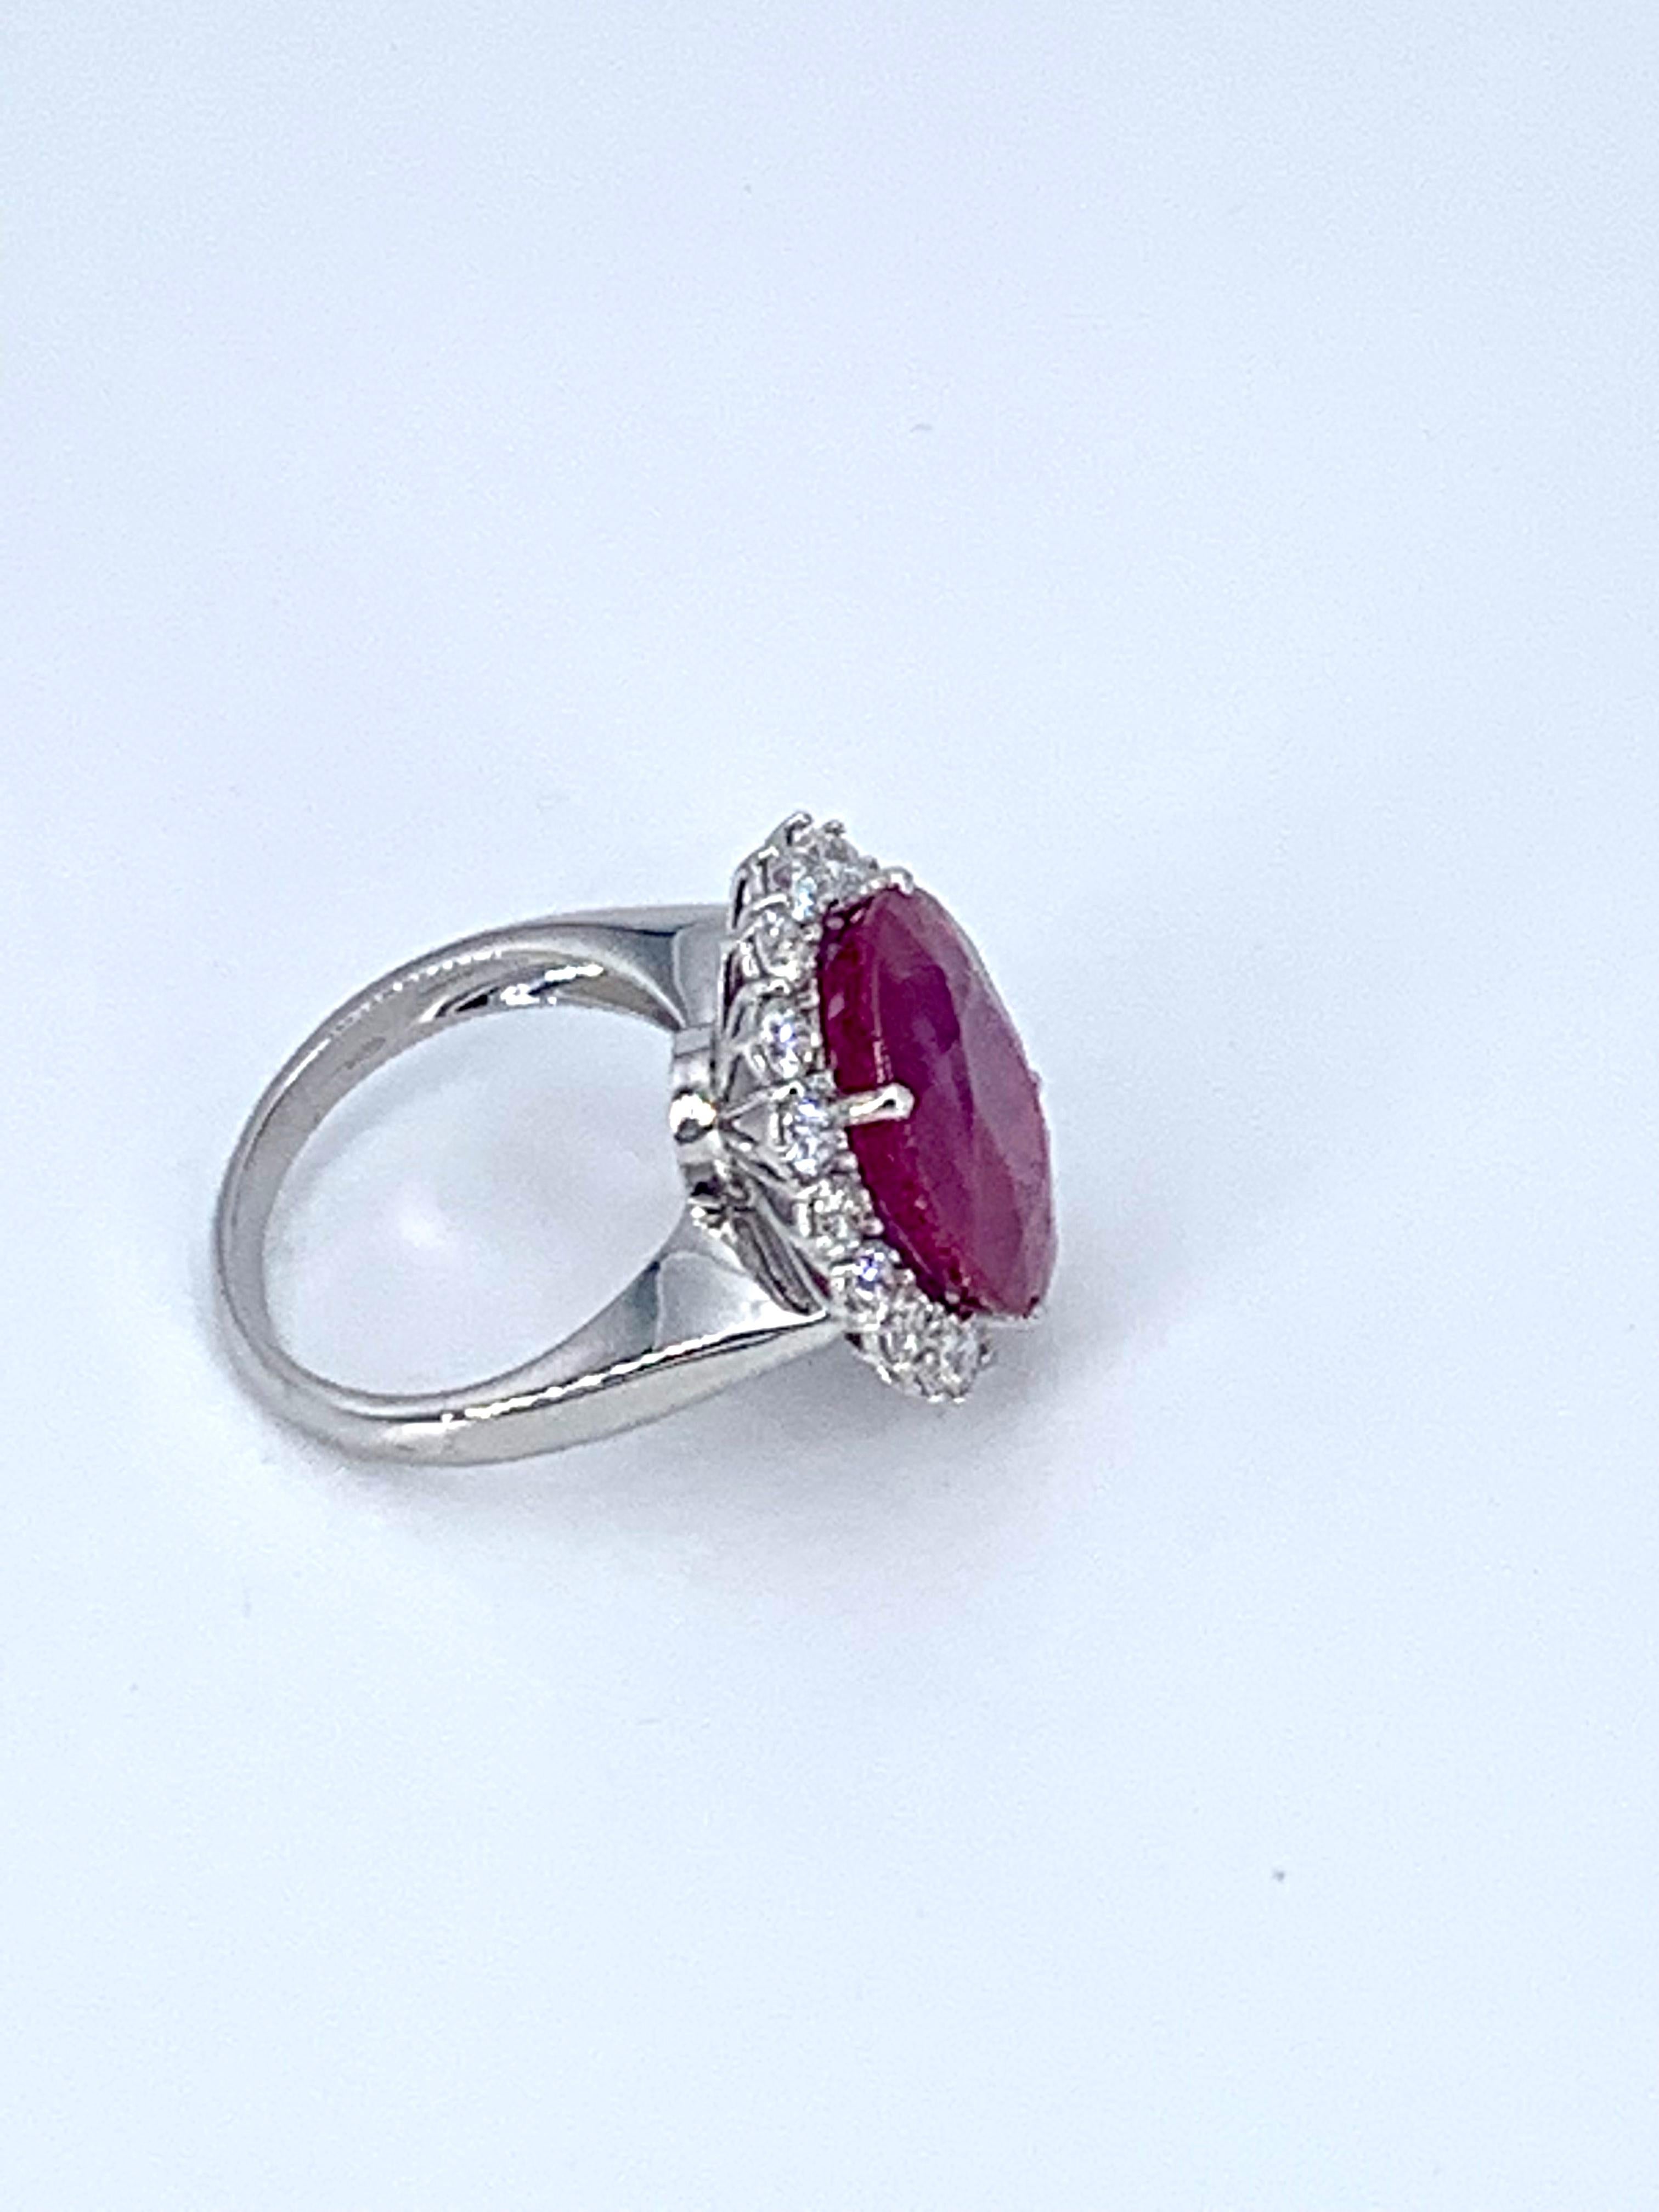 This impressive 13.35 carat Burma Ruby cocktail ring, is surrounded by 1.60 carat of natural white Diamonds, and set in an elegantly thin 18Kt white gold band.

For the lady who loves big Rubies and a ring that turns heads. 

The perfect gift for